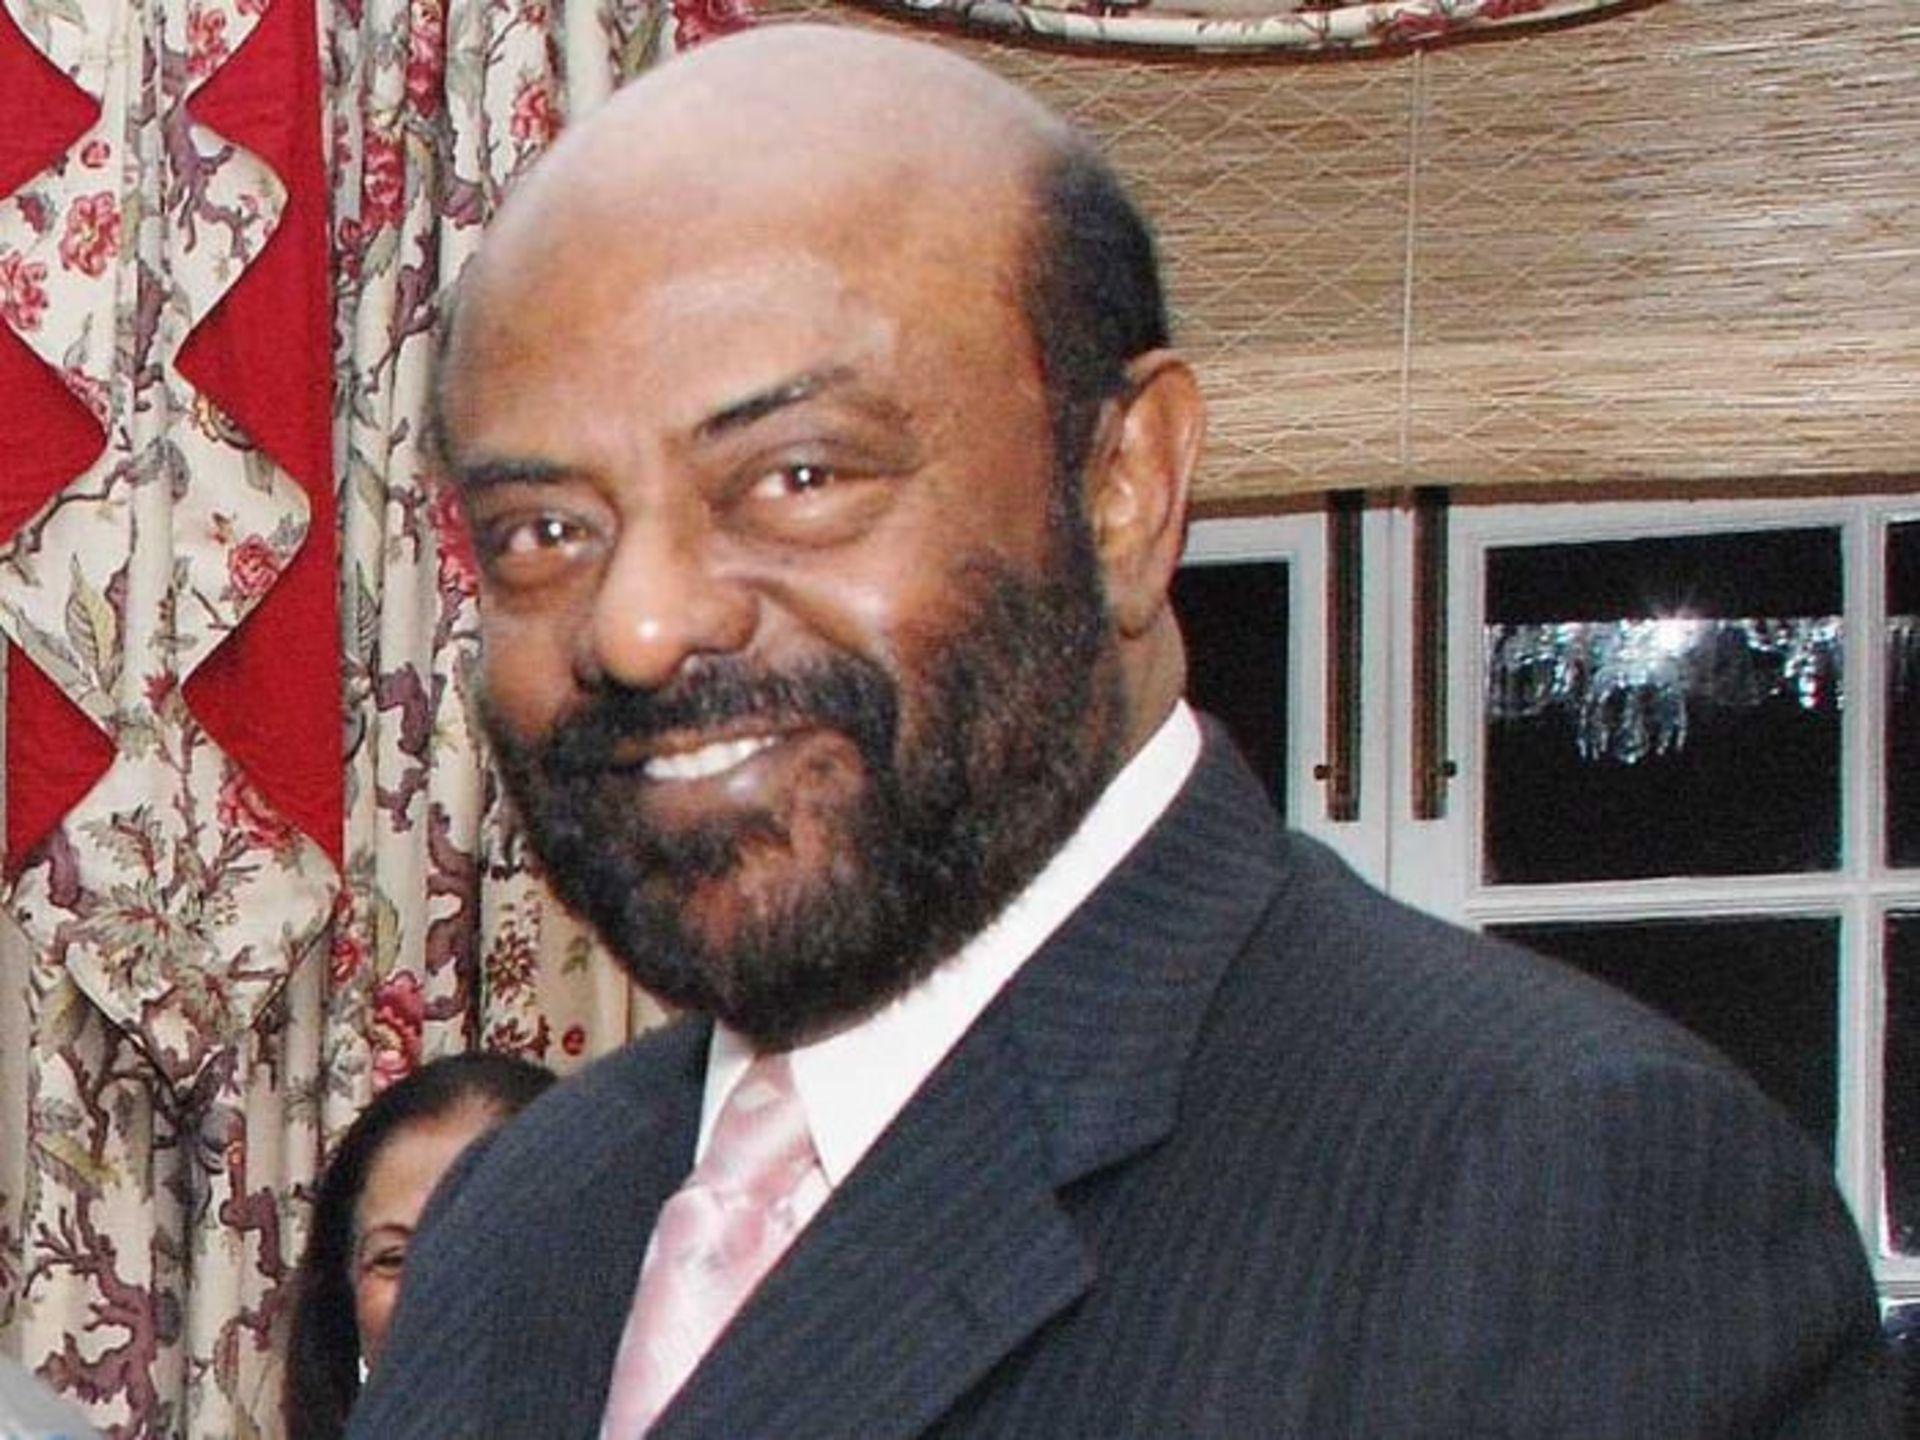 15-shiv-nadar-is-the-cofounder-of-the-hcl-group